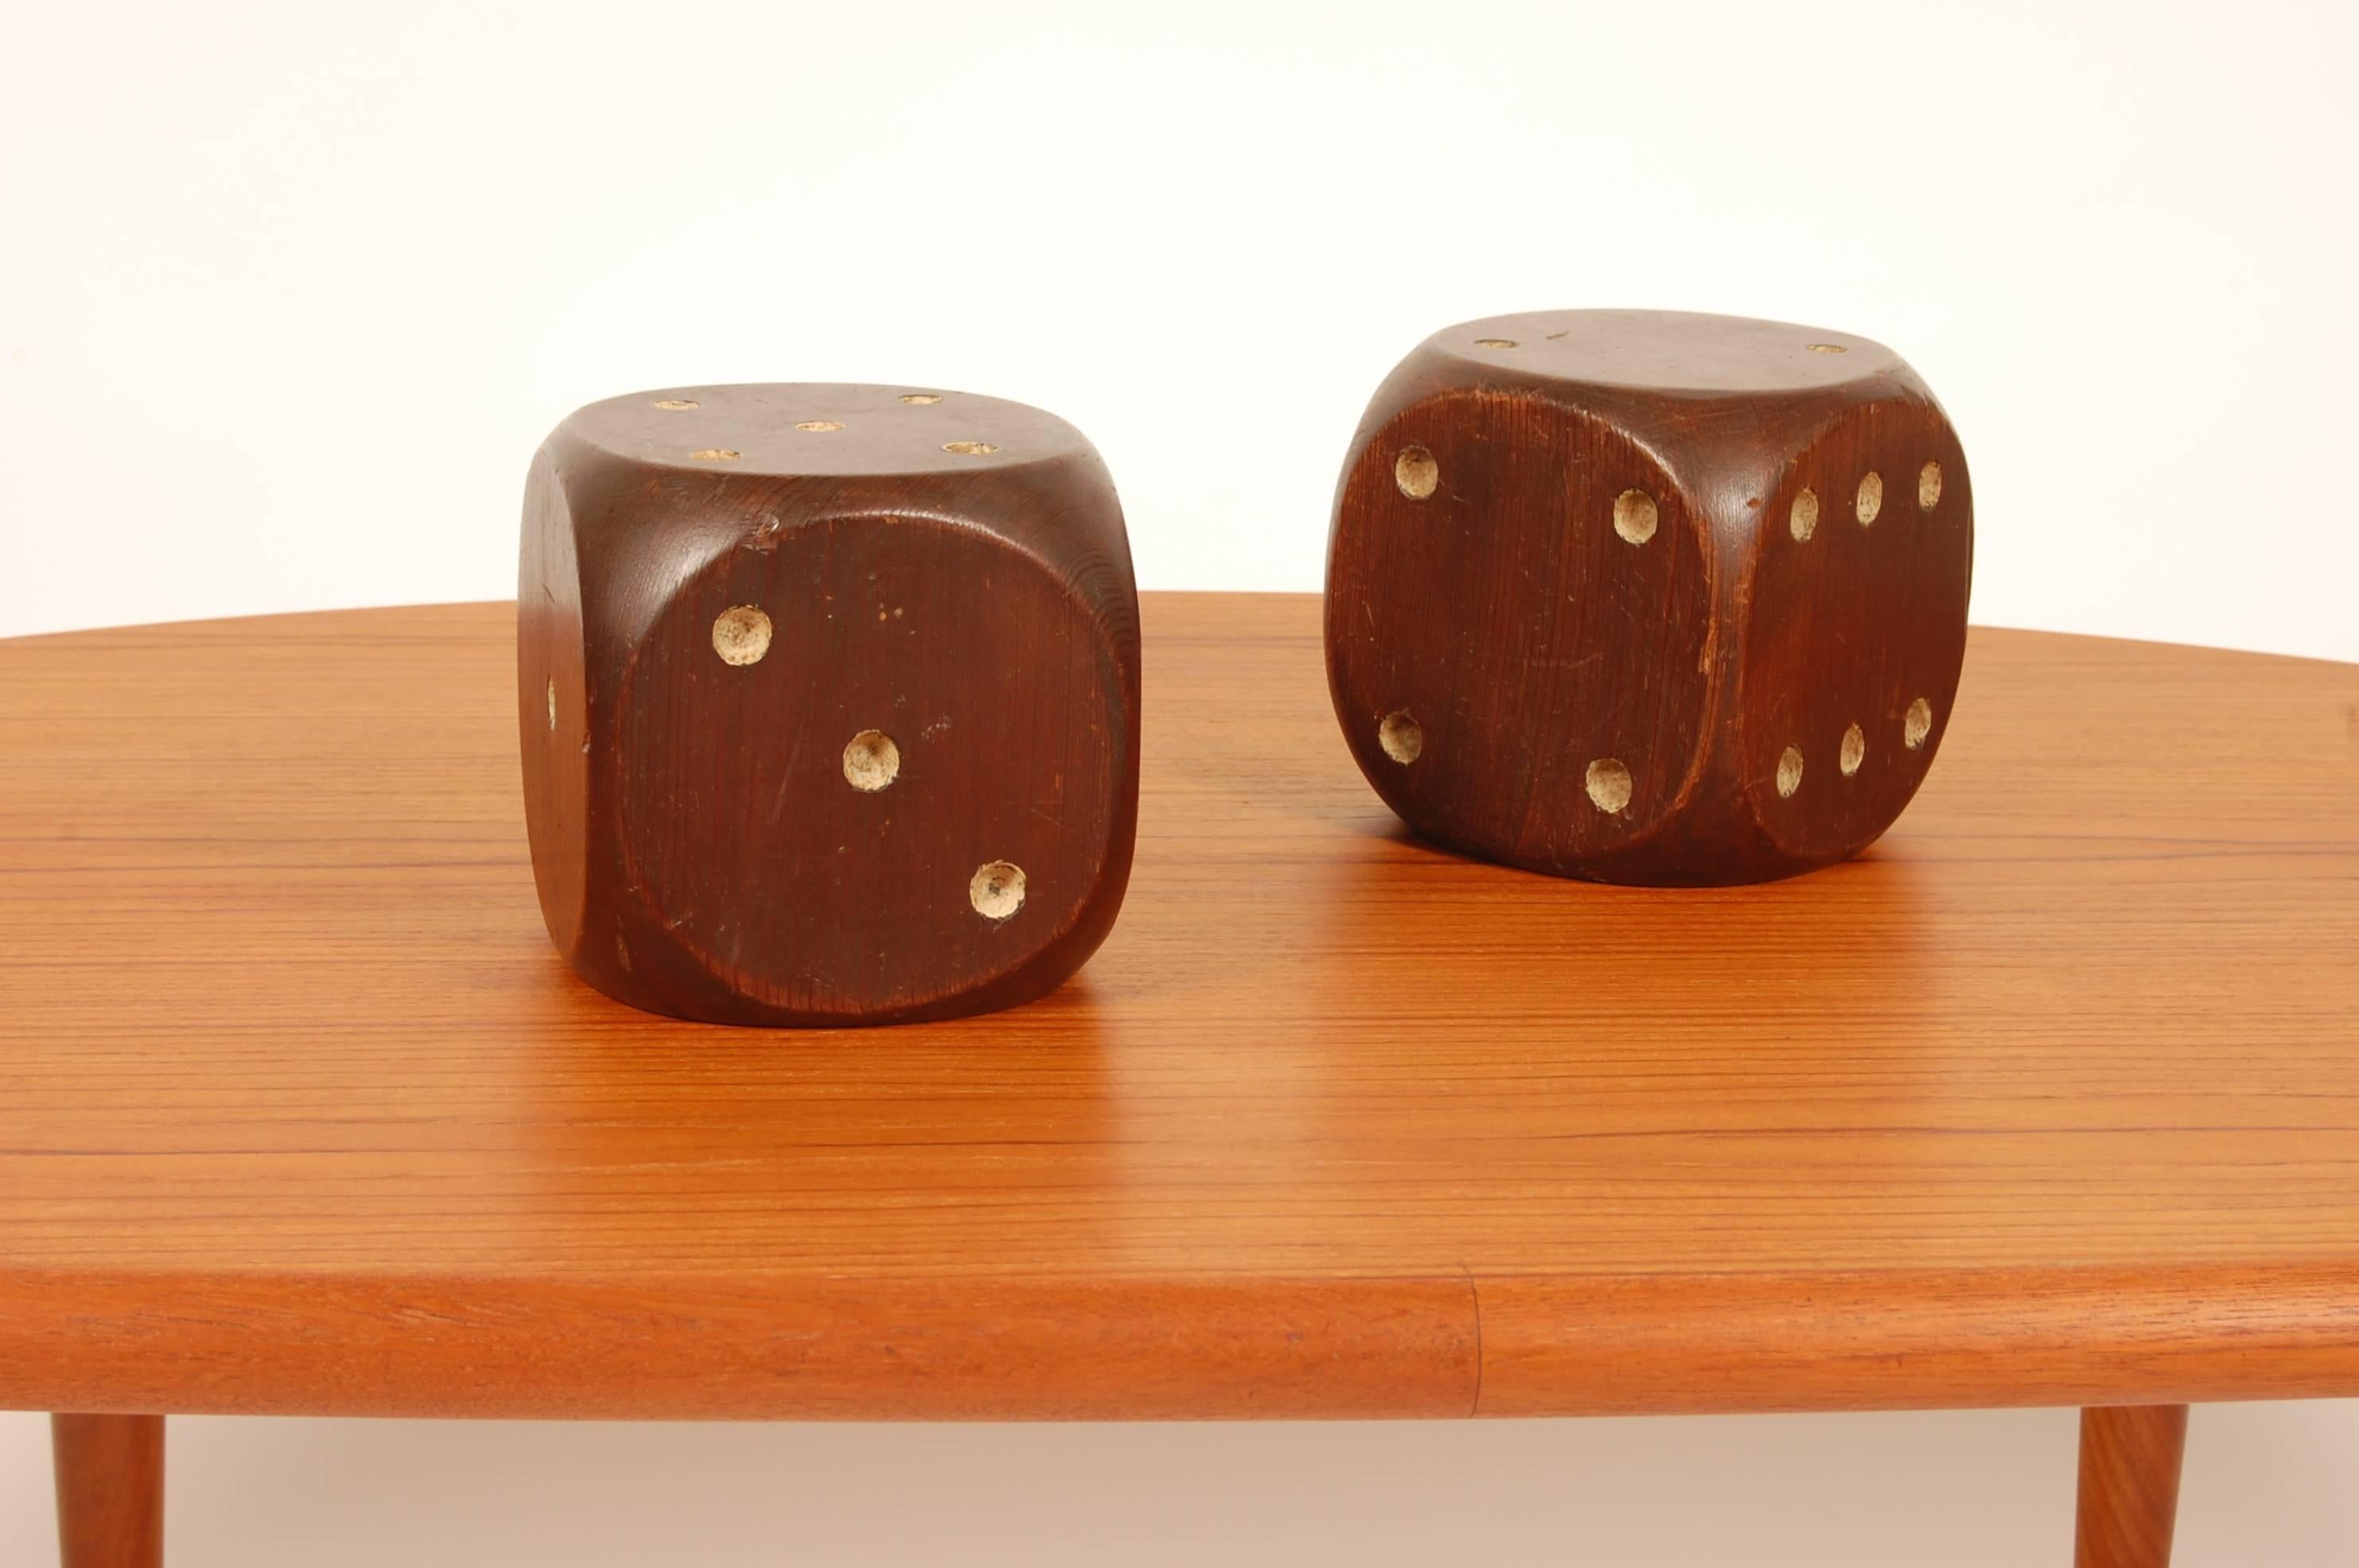 Carved Large Wooden Dice / Bookends